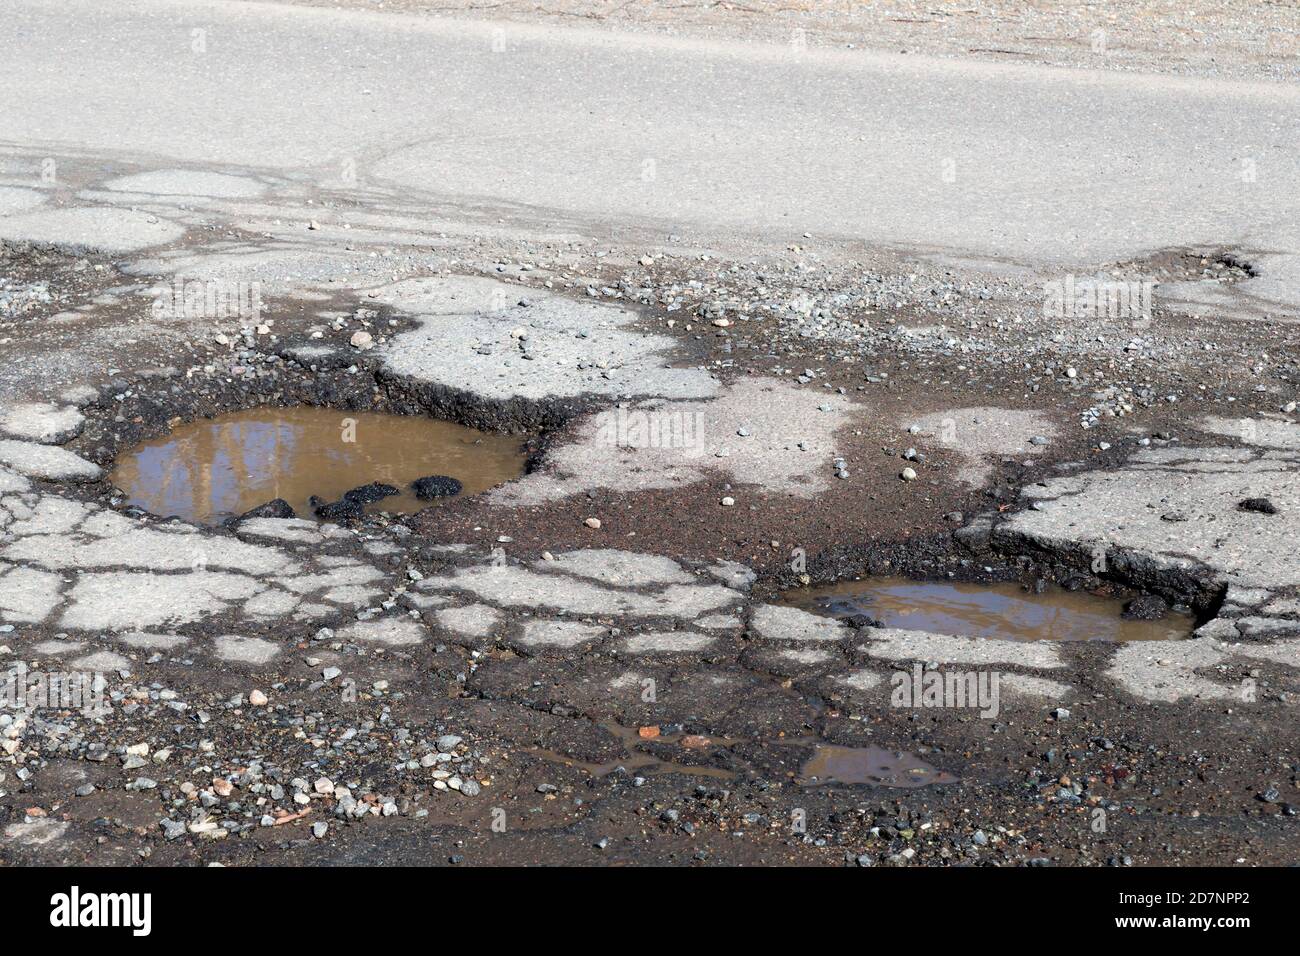 Potholes on a paved road. The road is in very poor condition. There is dirty water in the potholes. Stock Photo